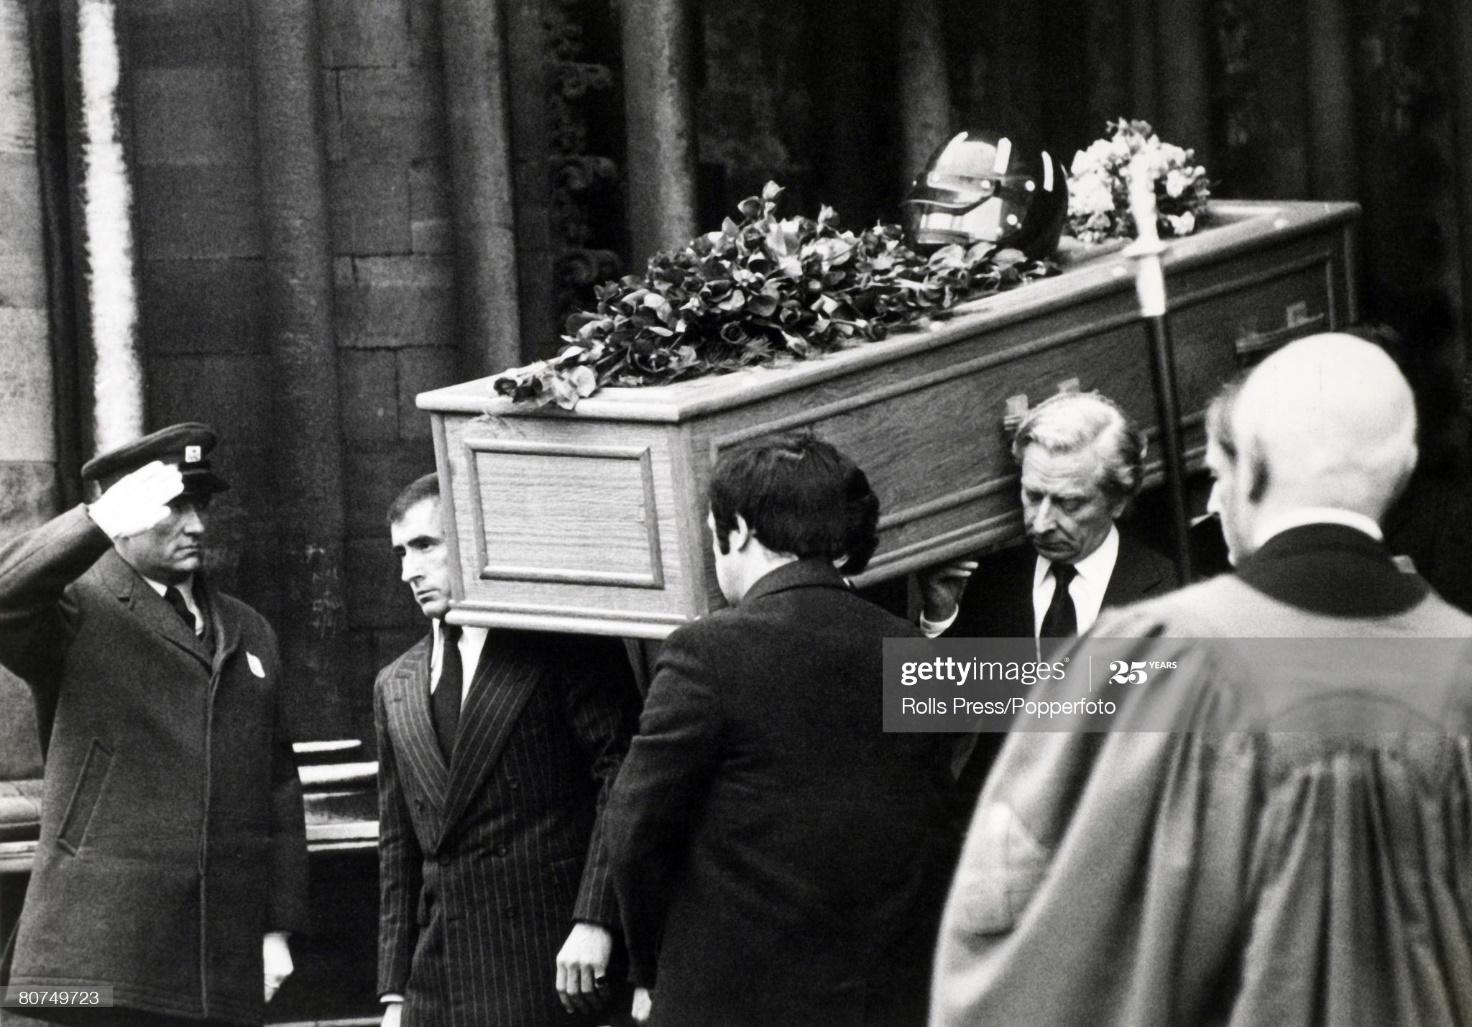 The funeral of Graham Hill.